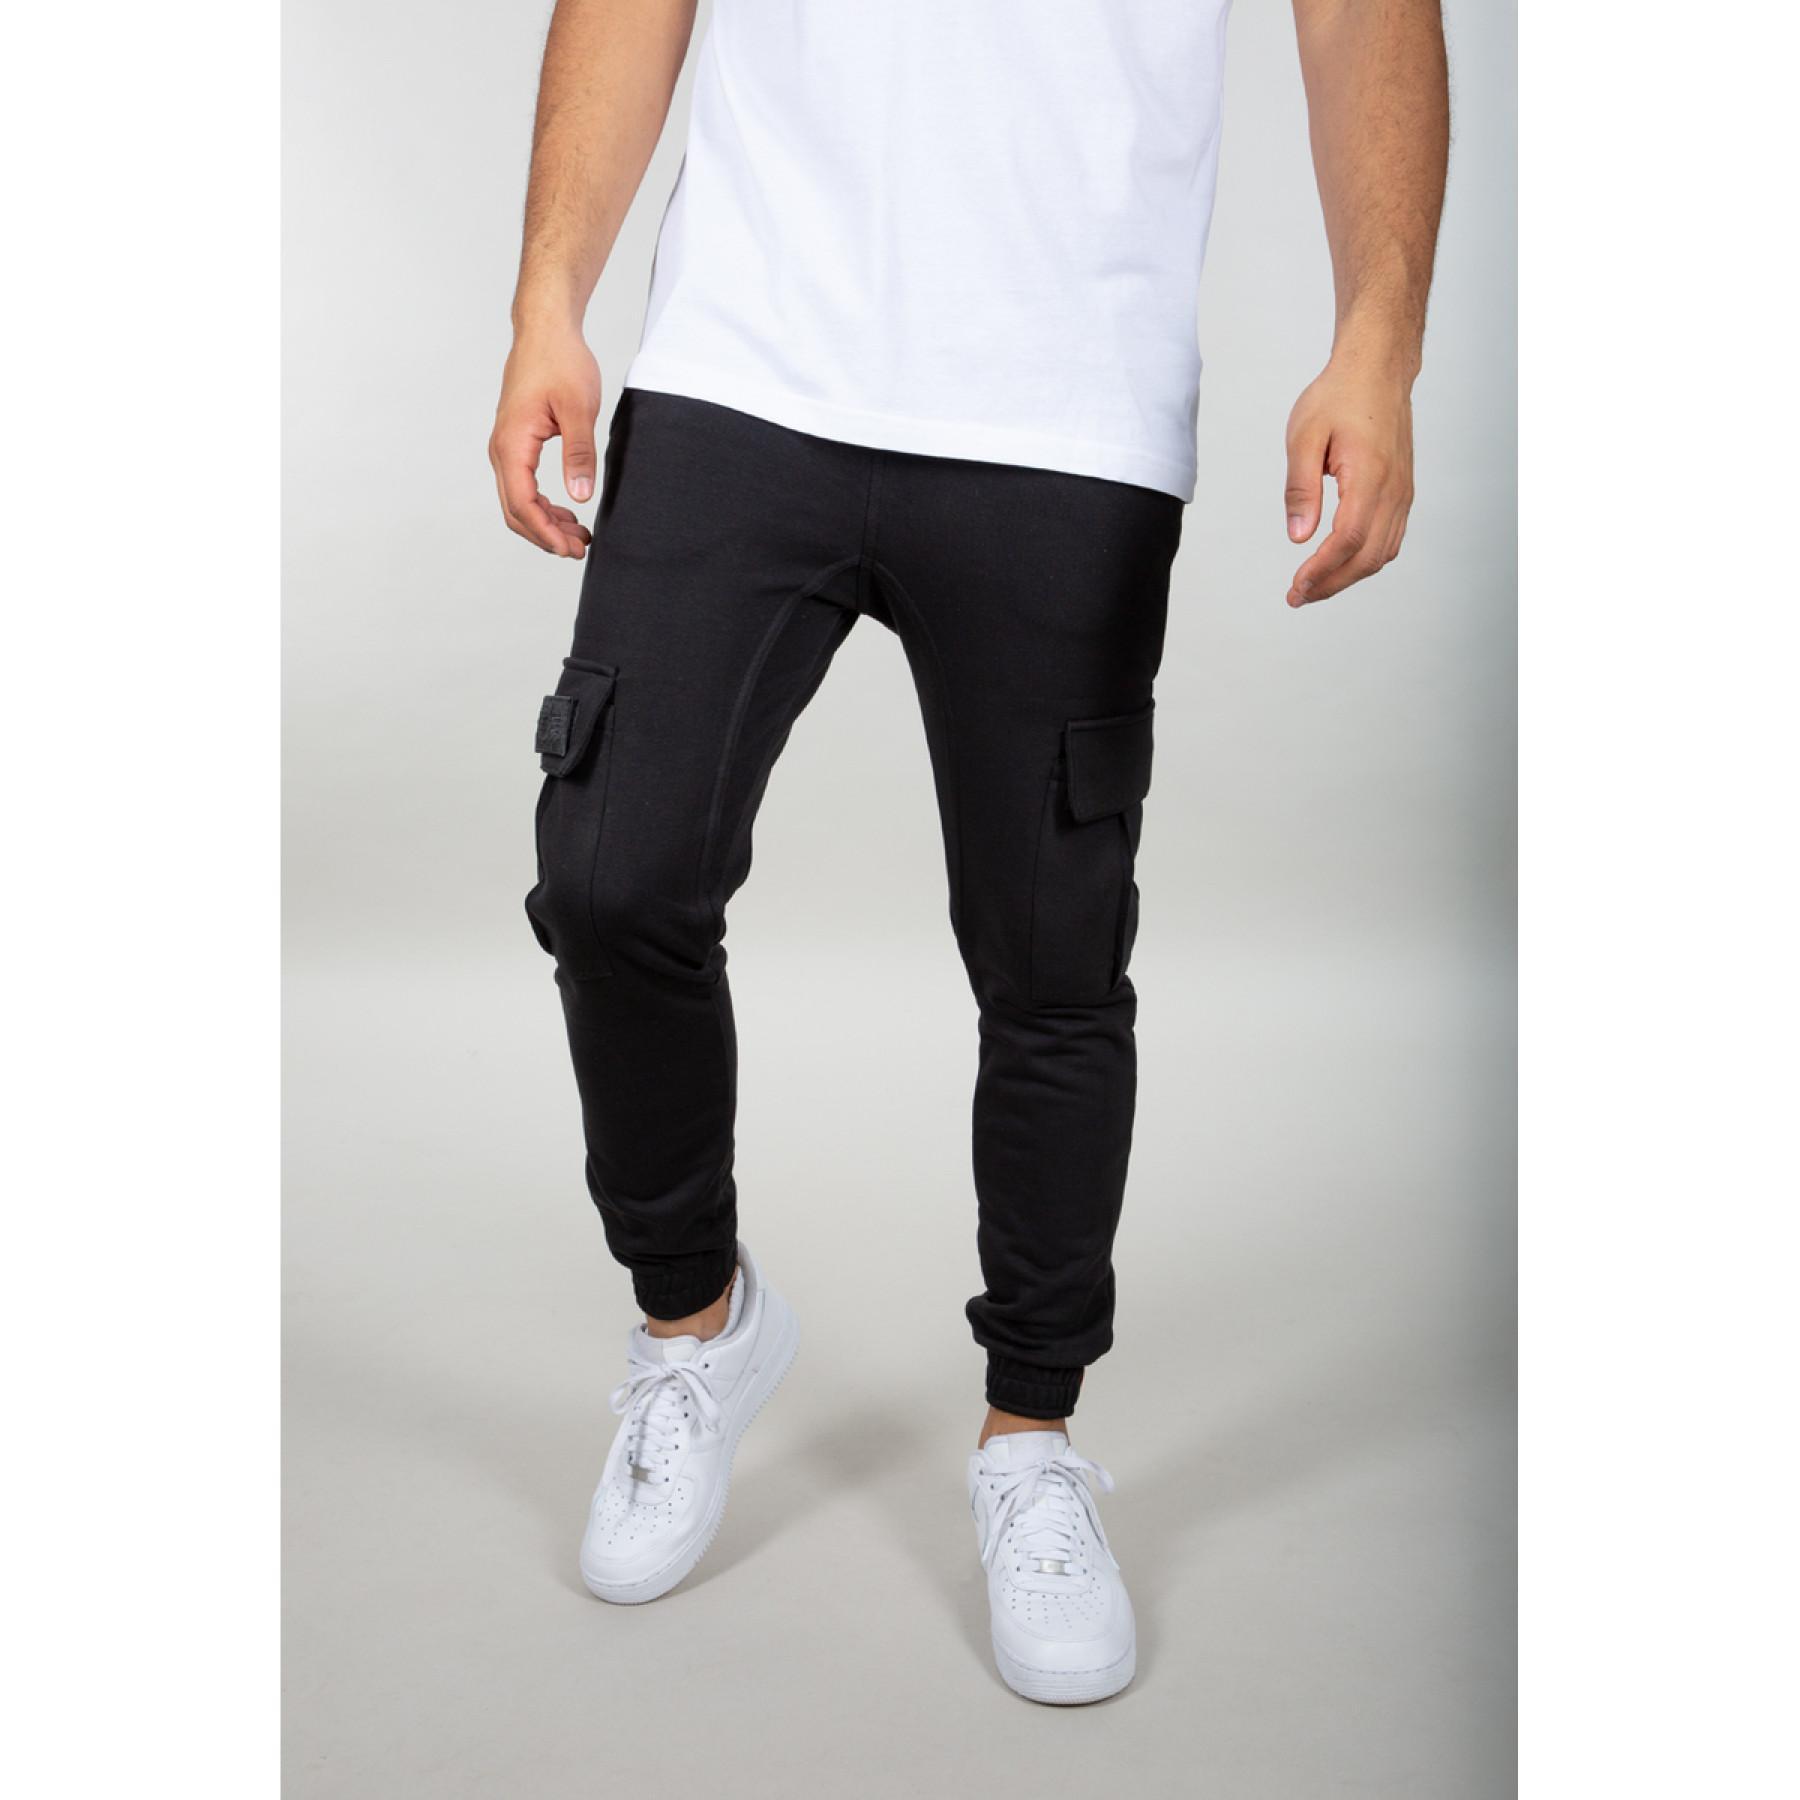 - pants and - - Men Industries Jogging Clothing Trousers Alpha Jogging Terry